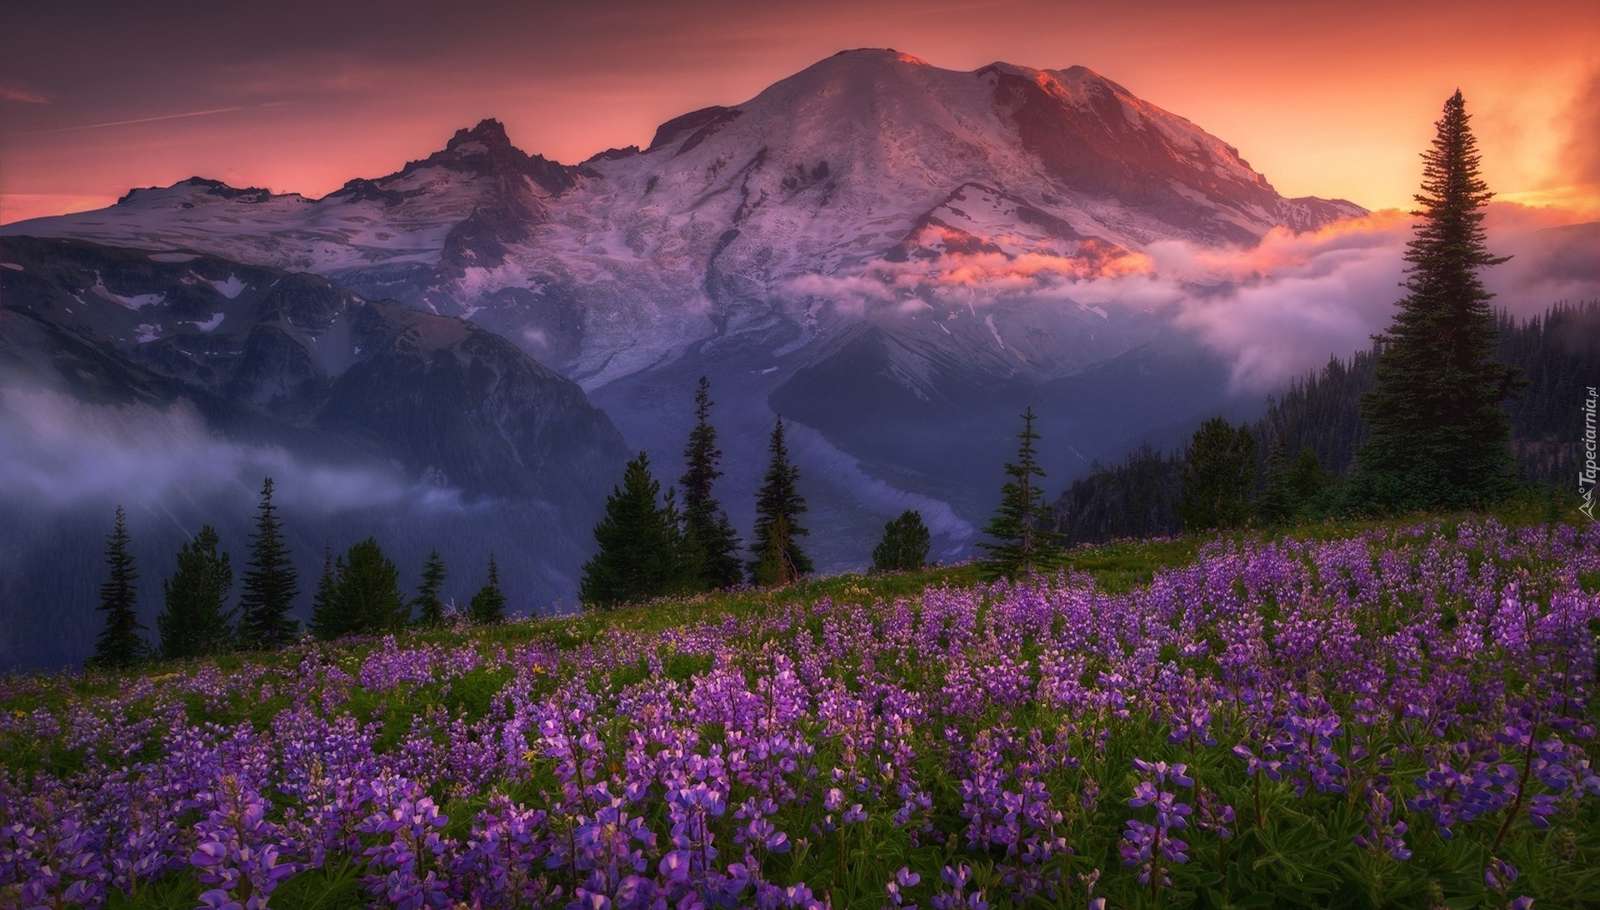 Lupine meadow in the mountains jigsaw puzzle online